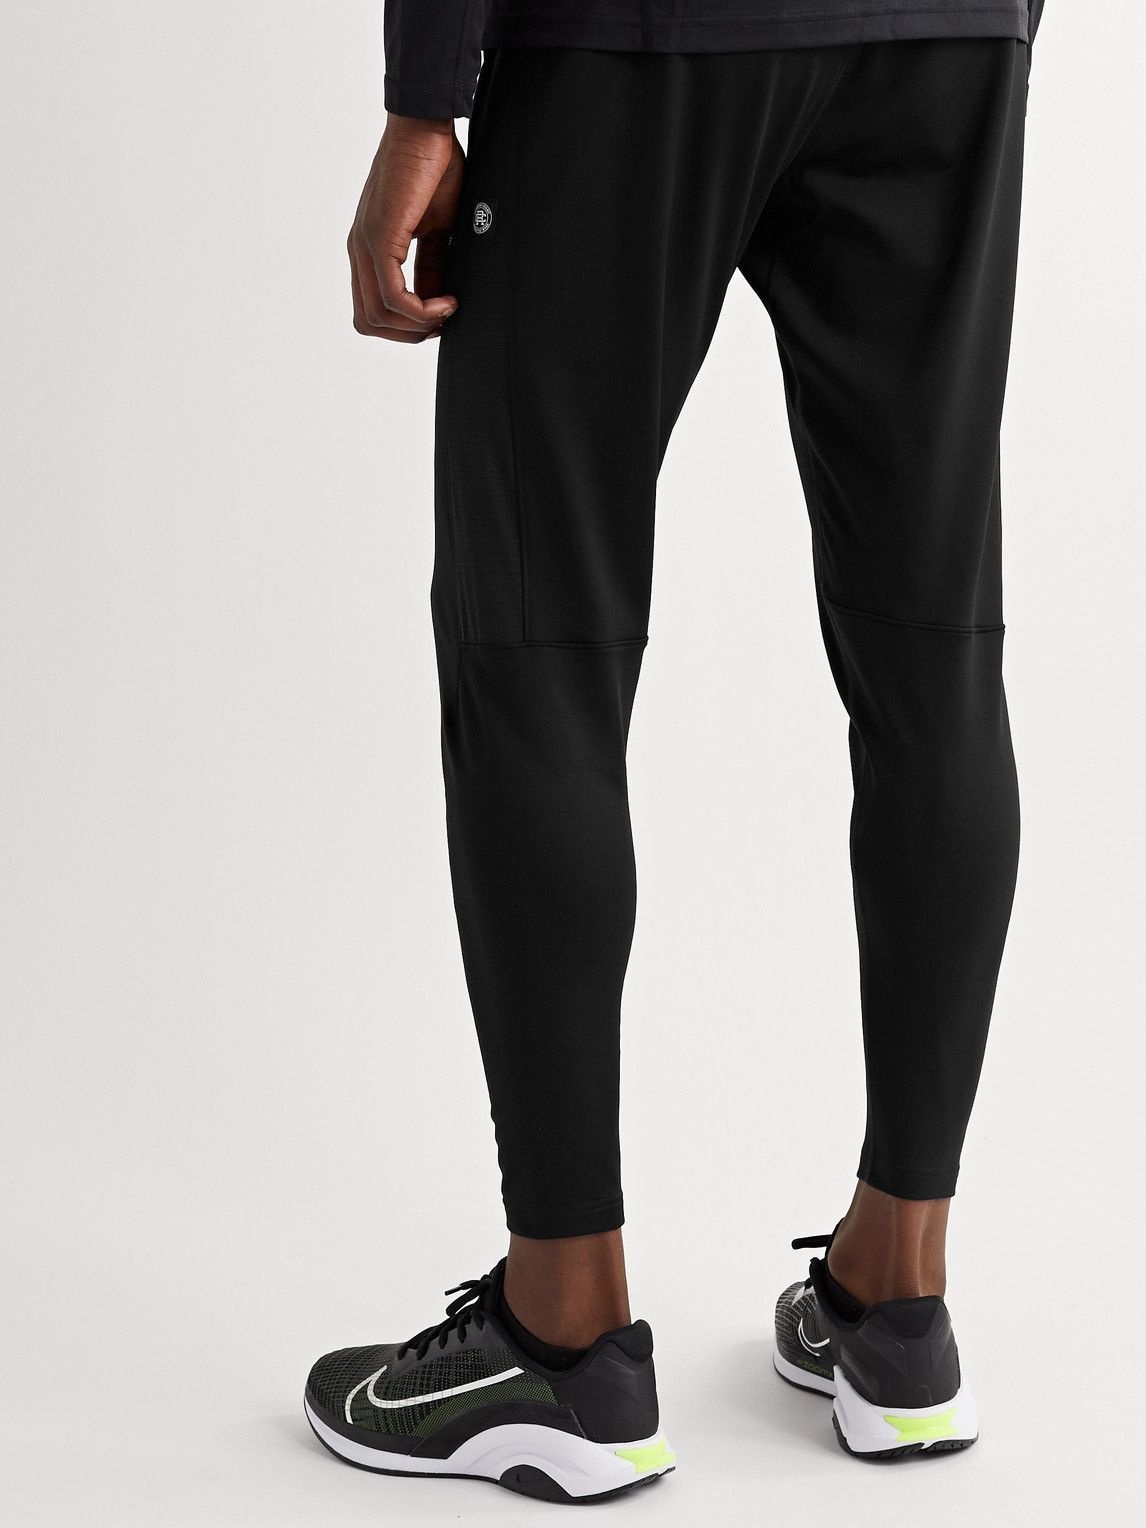 Reigning Champ - Ripstop-Trimmed Polartec Power Stretch Pro Sweatpants -  Black Reigning Champ